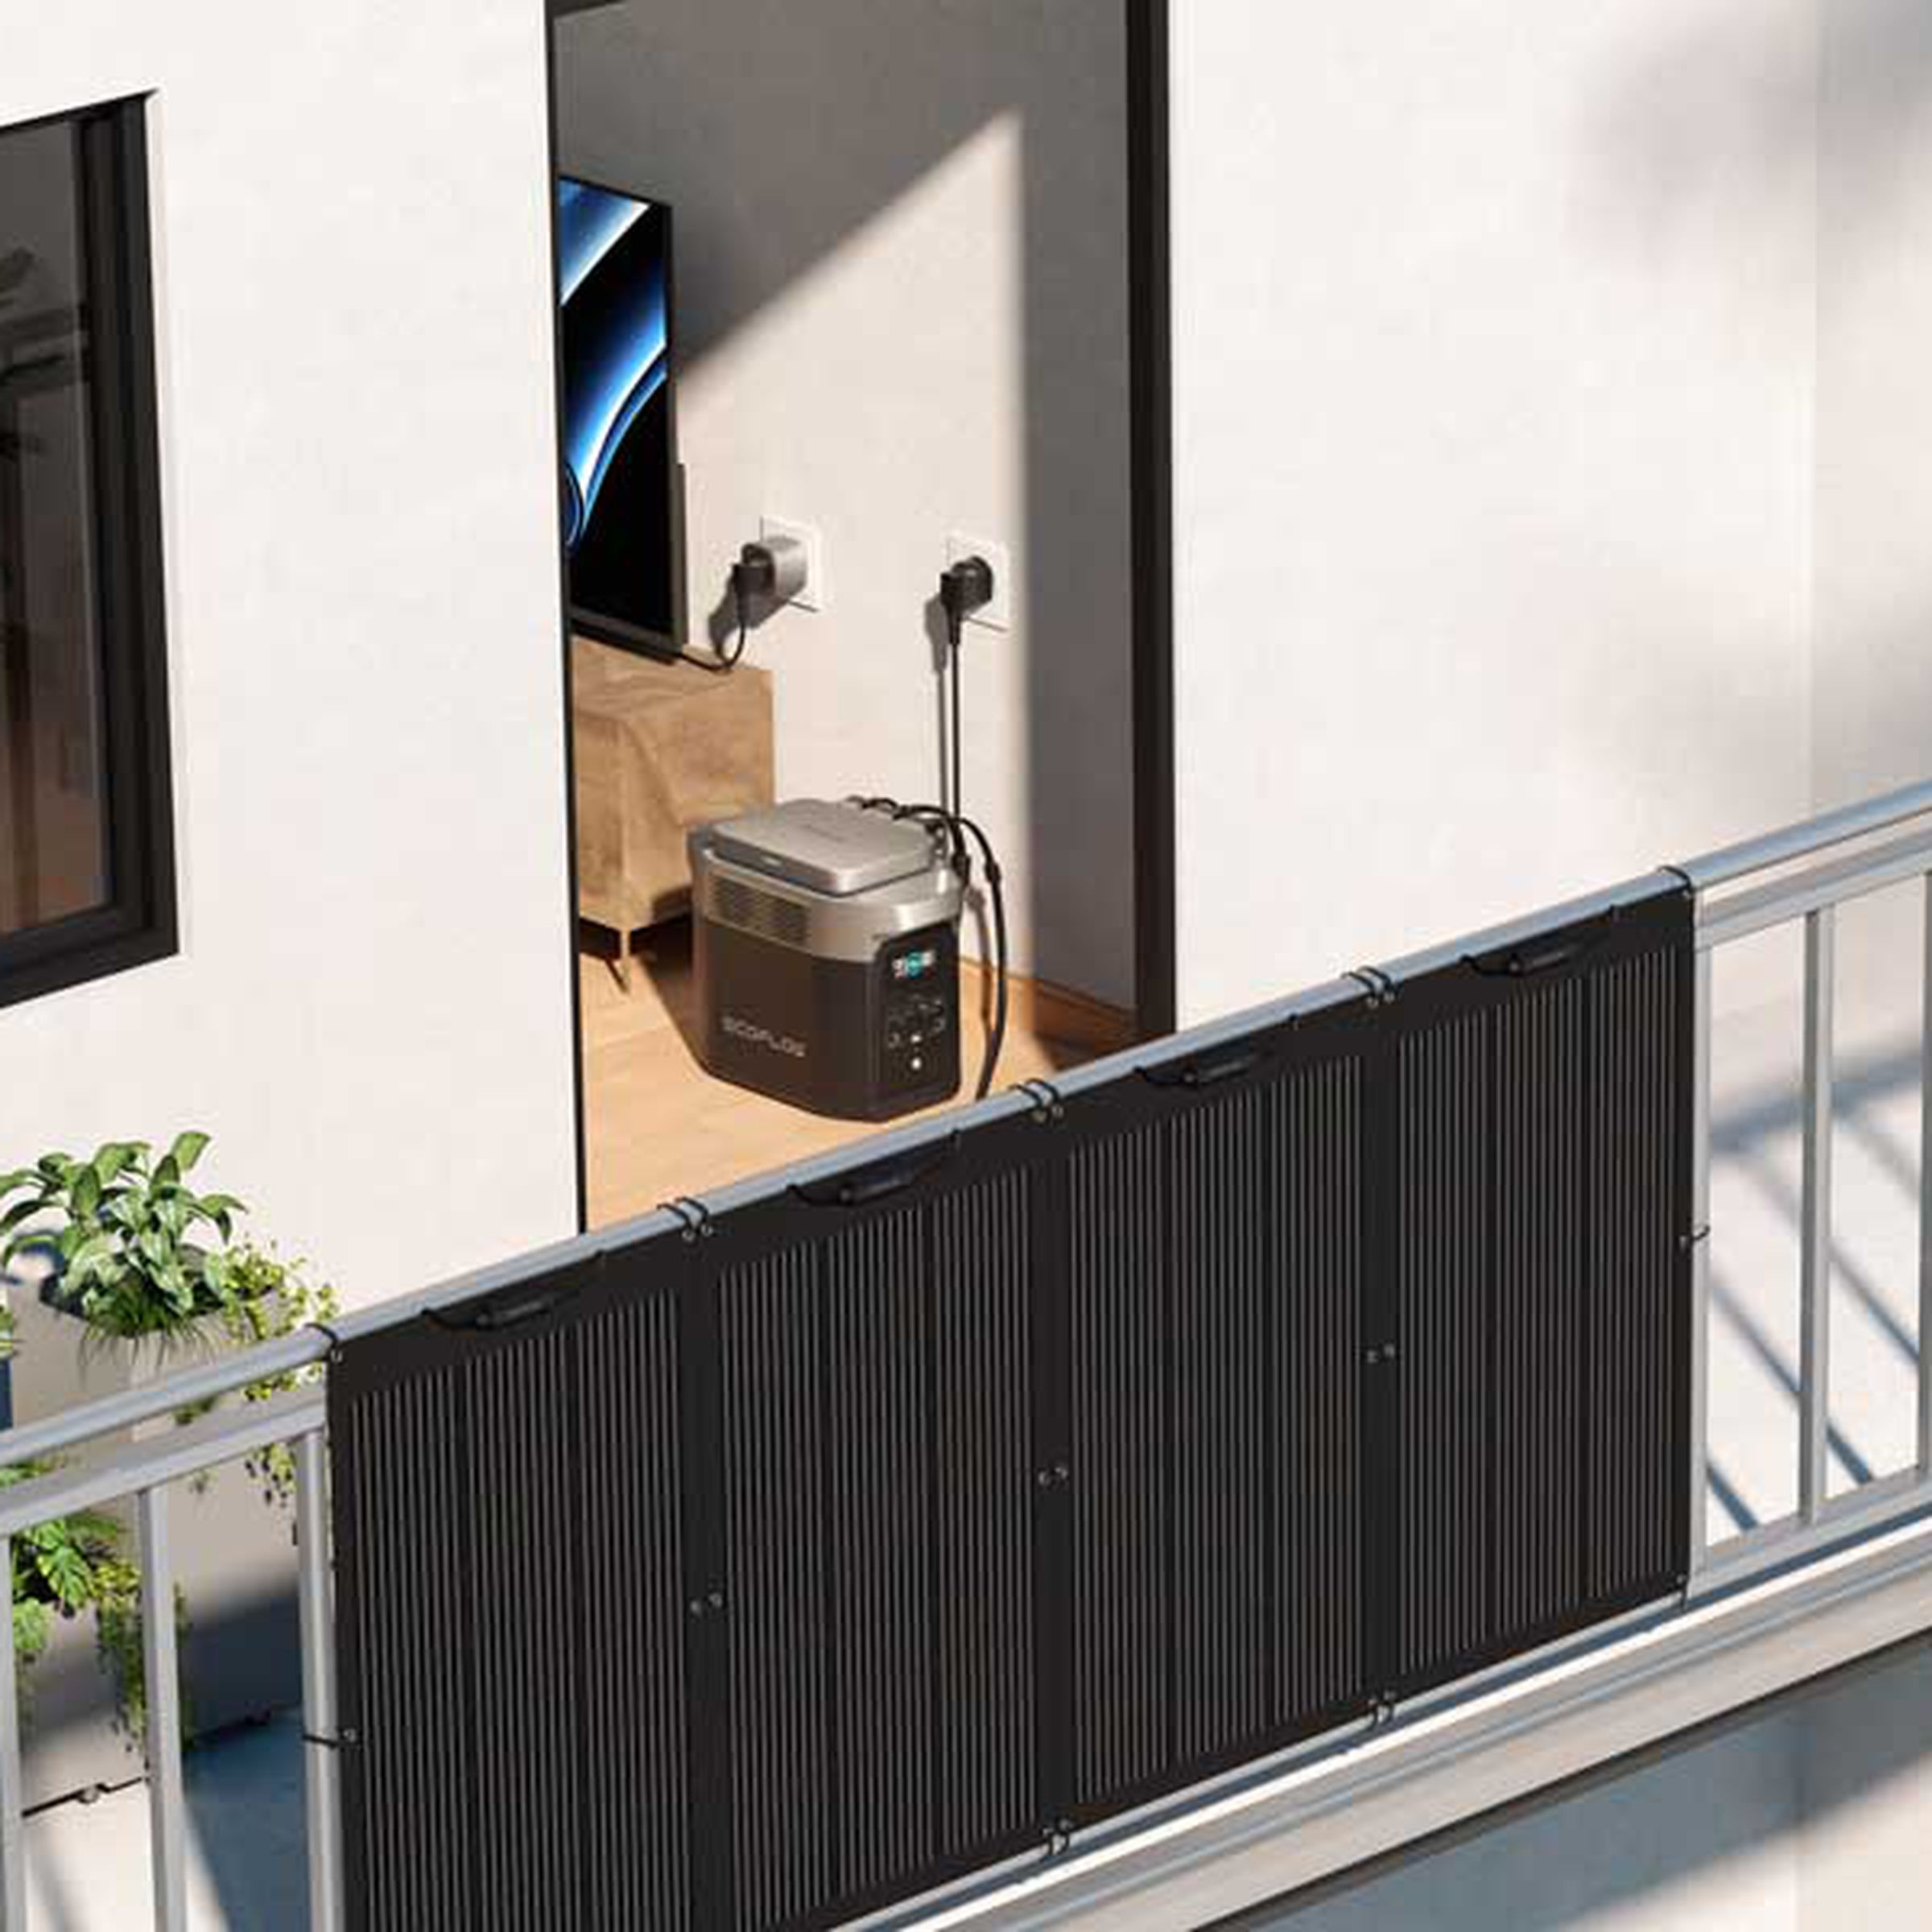 A view into an open apartment window where we see an EcoFlow Powerstream plugged into a wall socket and an EcoFlow battery with cables running outside to solar panels hung on a railing.